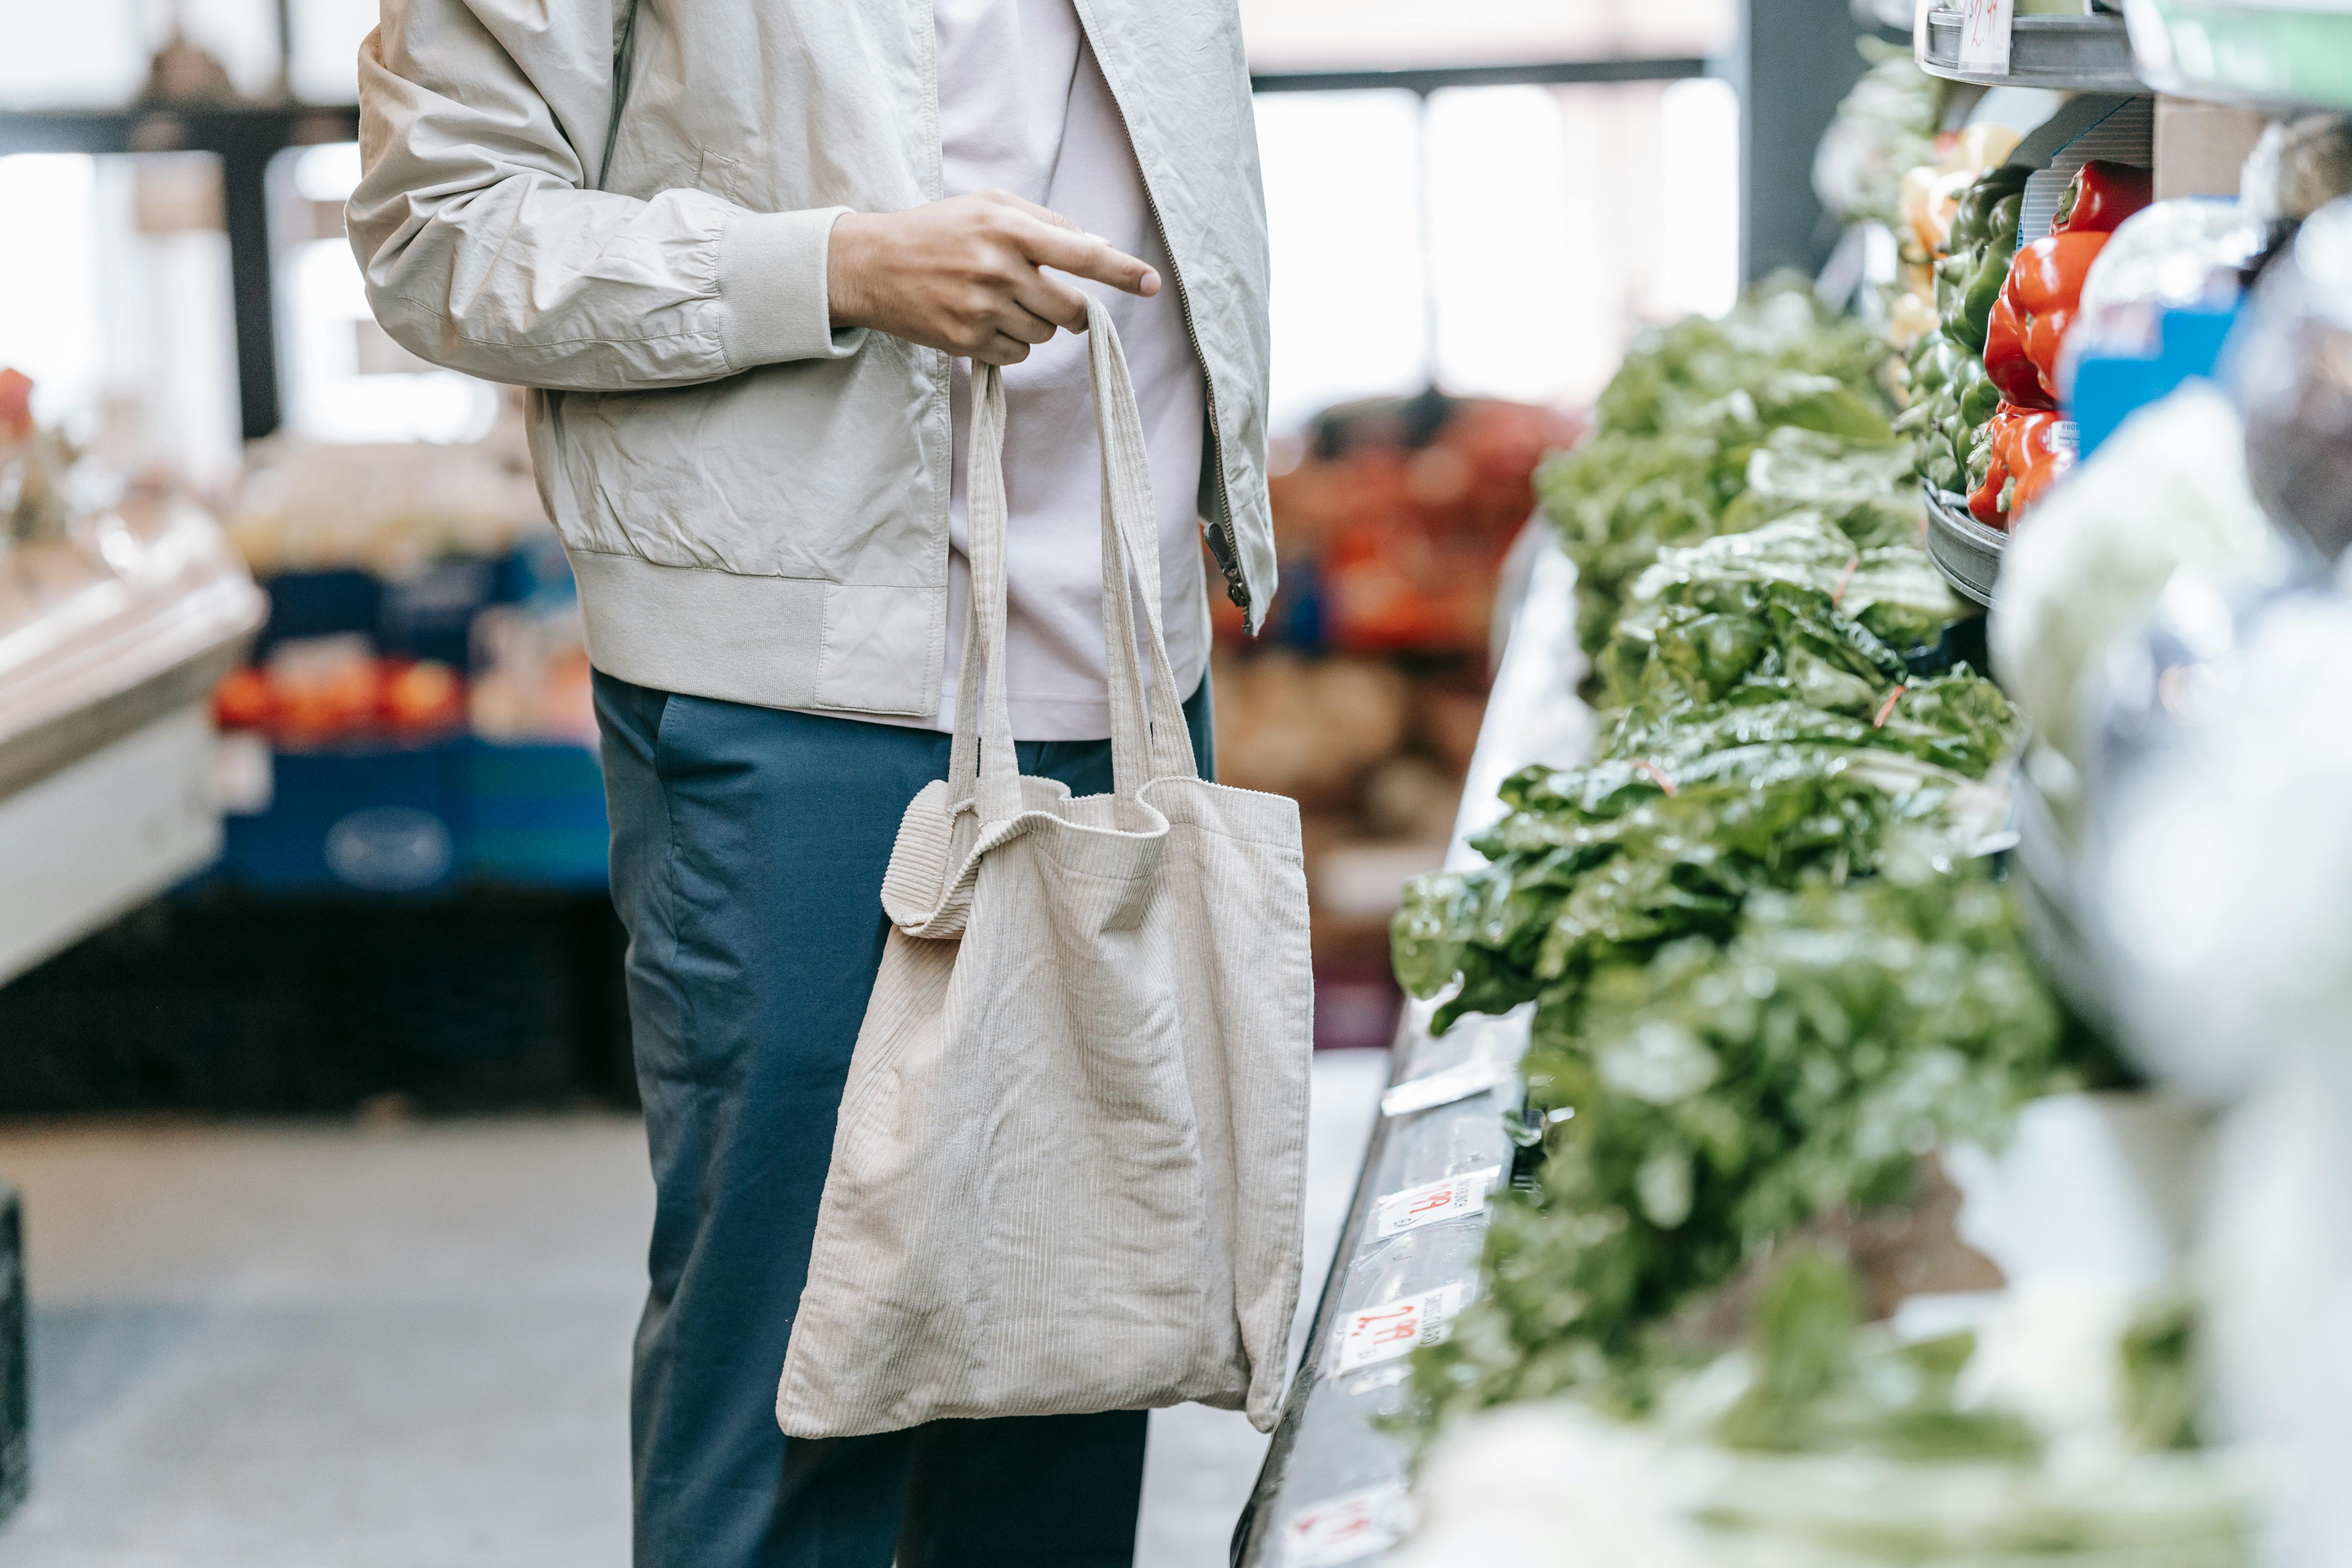 Man in a grocery store | Source: Pexels